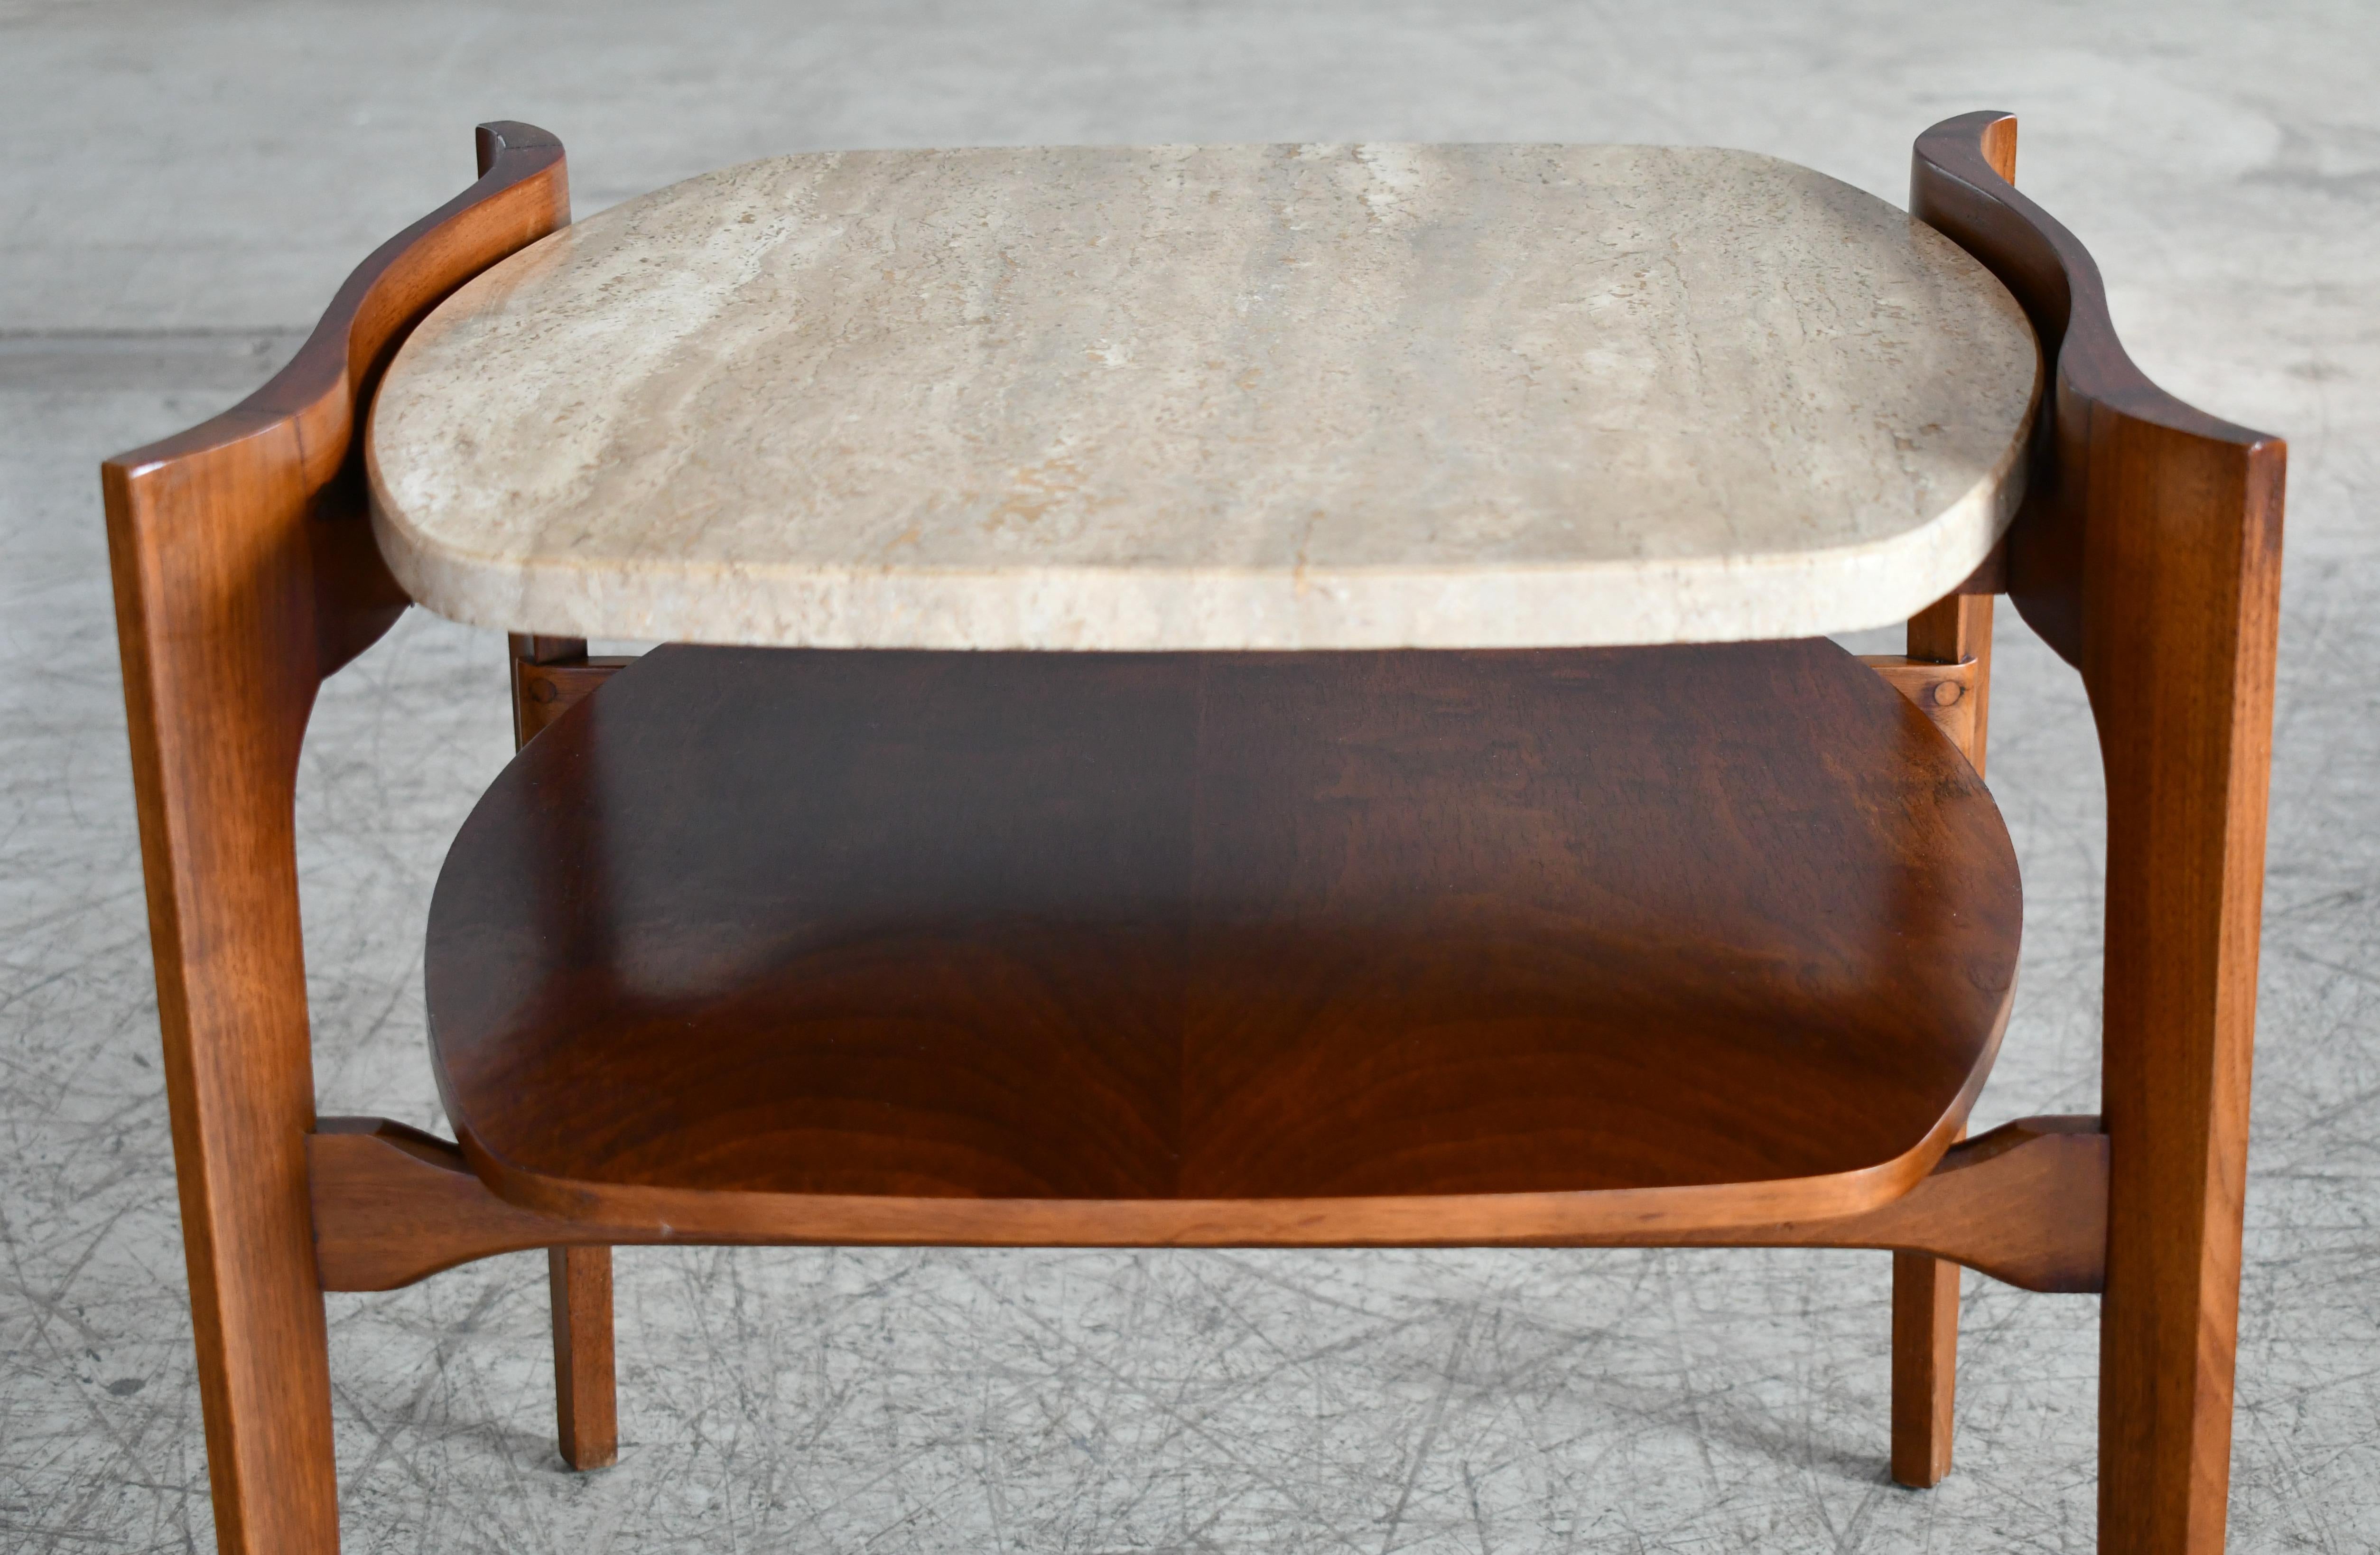 Mid-20th Century Bertha Schaefer Midcentury End or Side Tables in Walnut with Travertine Tops